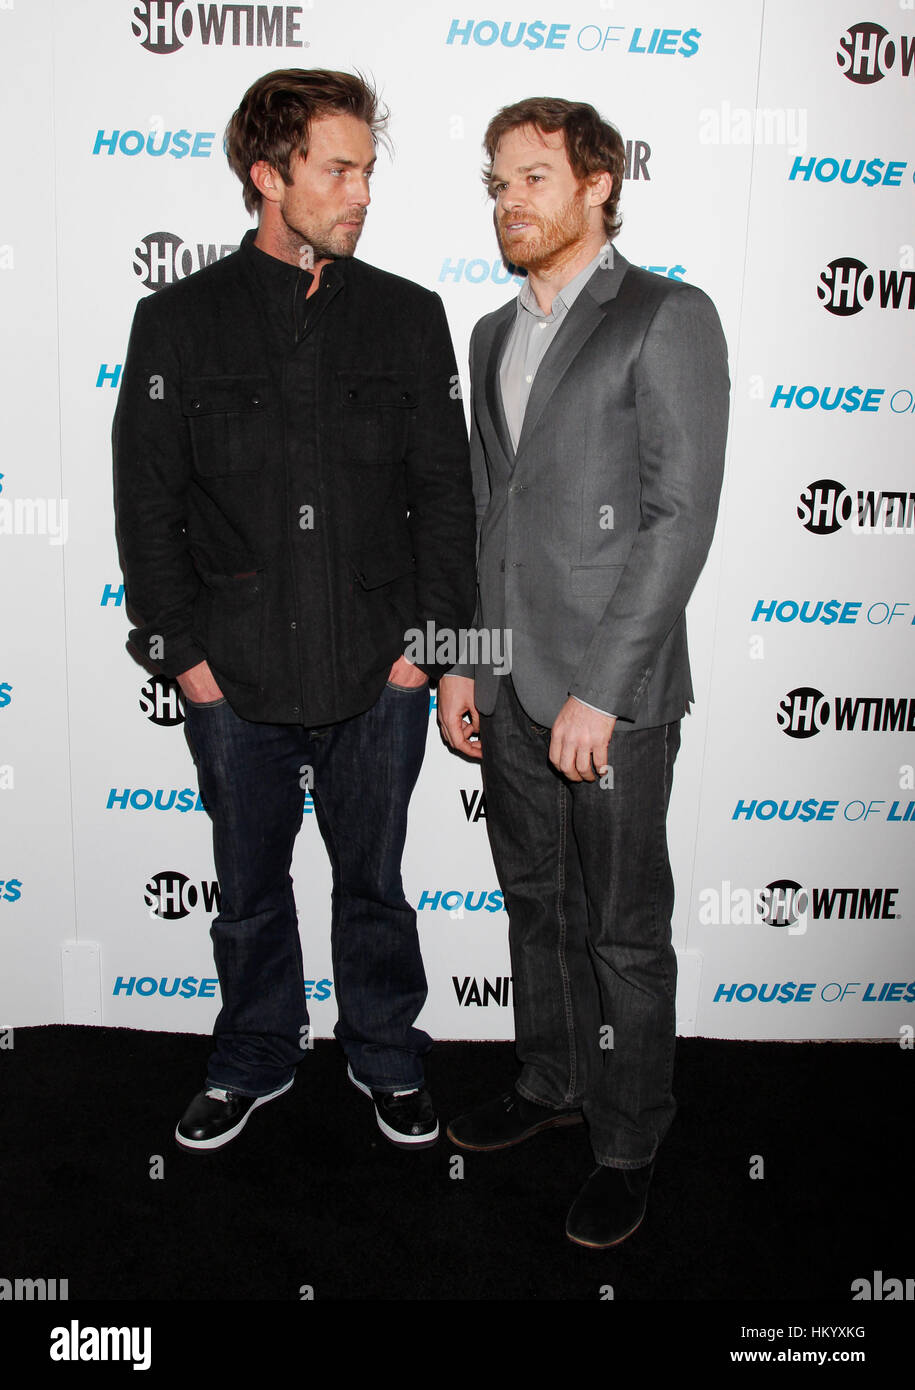 Michael C. Hall, right, and Desmond Harrington arrive at the Showtime Premiere Party and Screening of House of Lies in Los Angeles, California on January, 4, 2012. Photo by Francis Specker Stock Photo